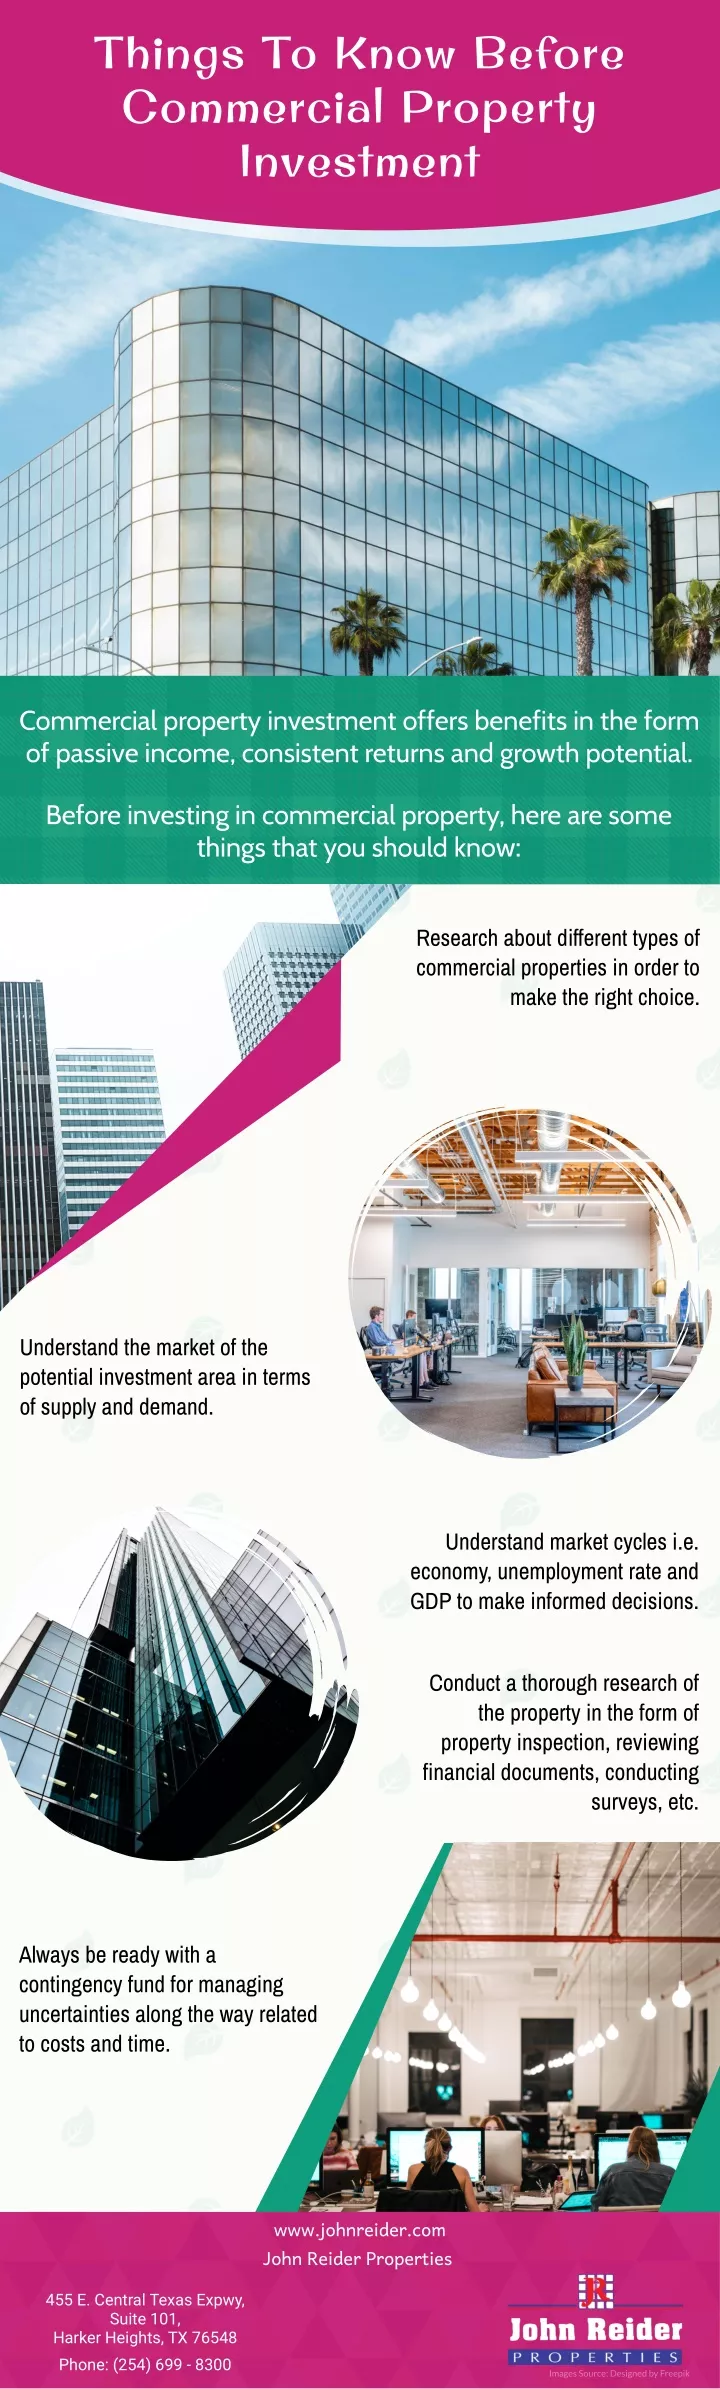 things to know before commercial property